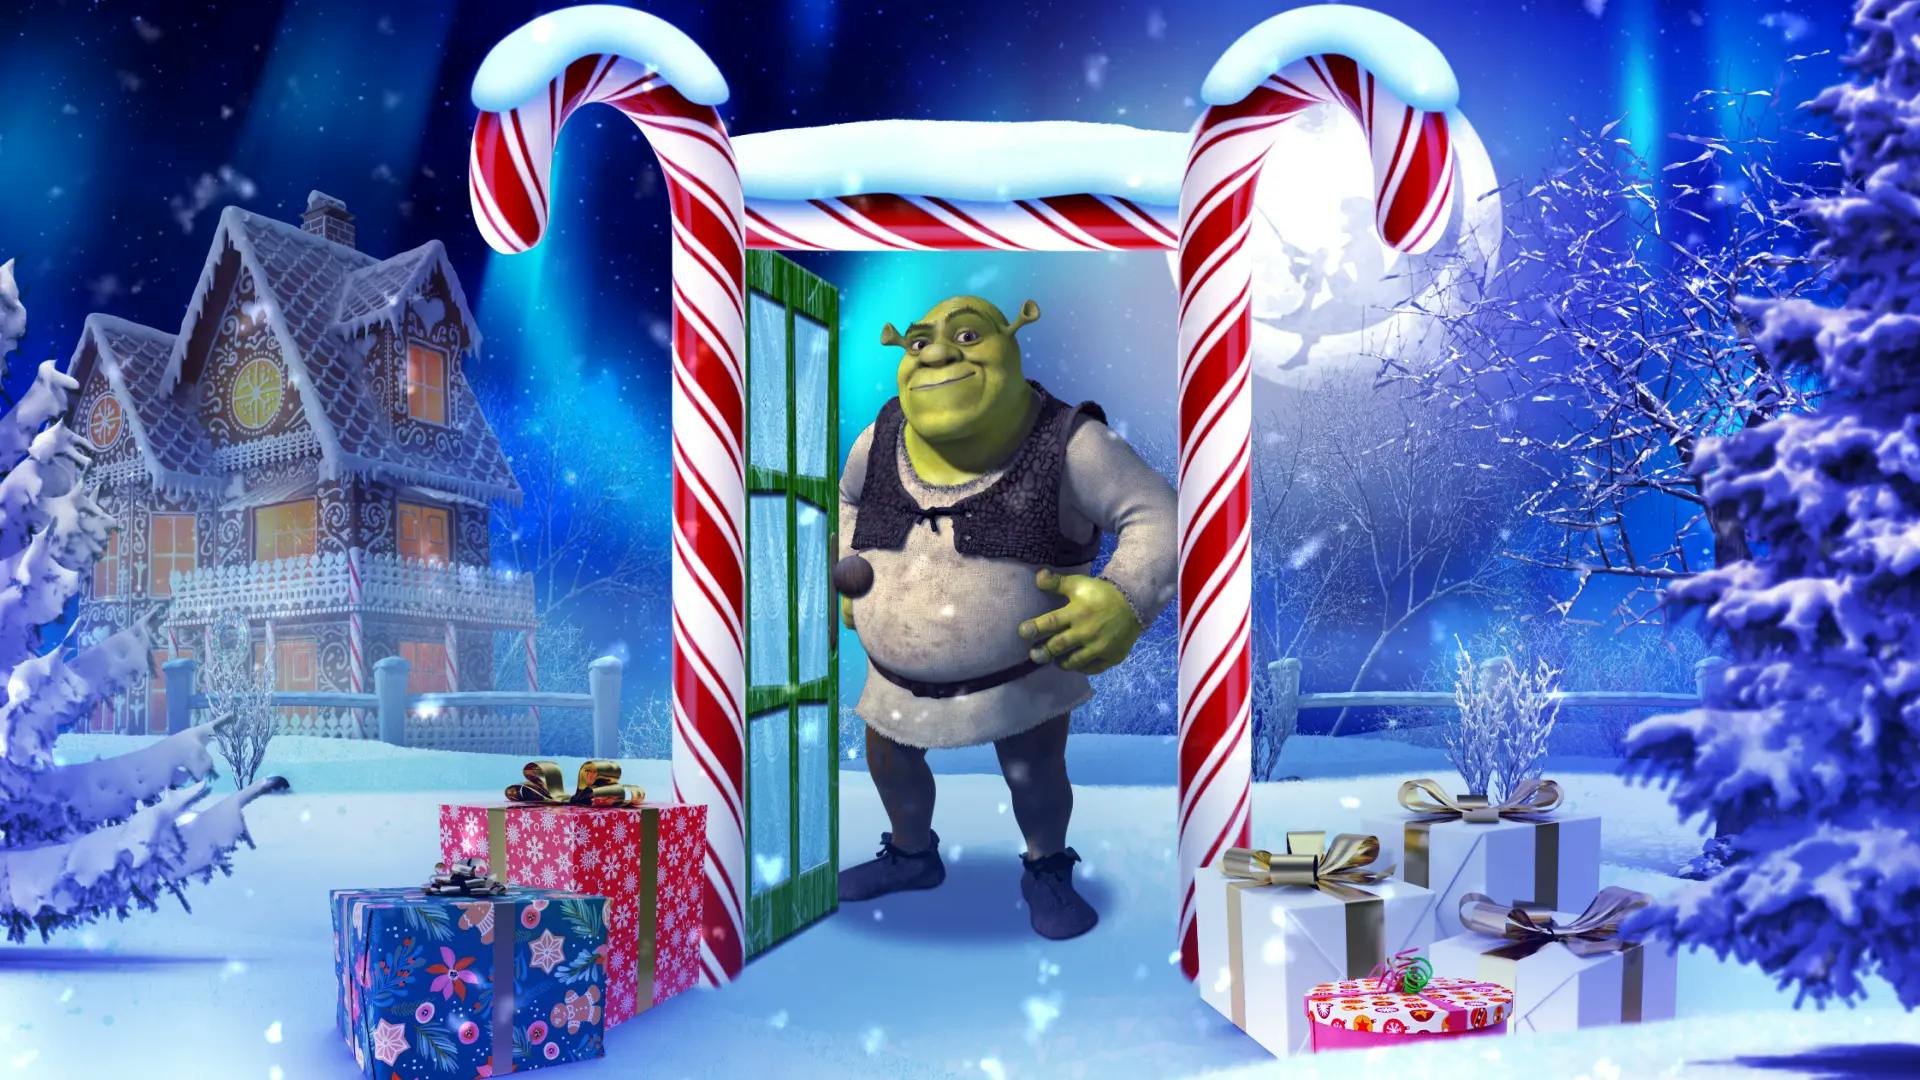 Shrek is at the door to sing christmas carols in this still from from DreamWorks TVs Christmas promotainment.